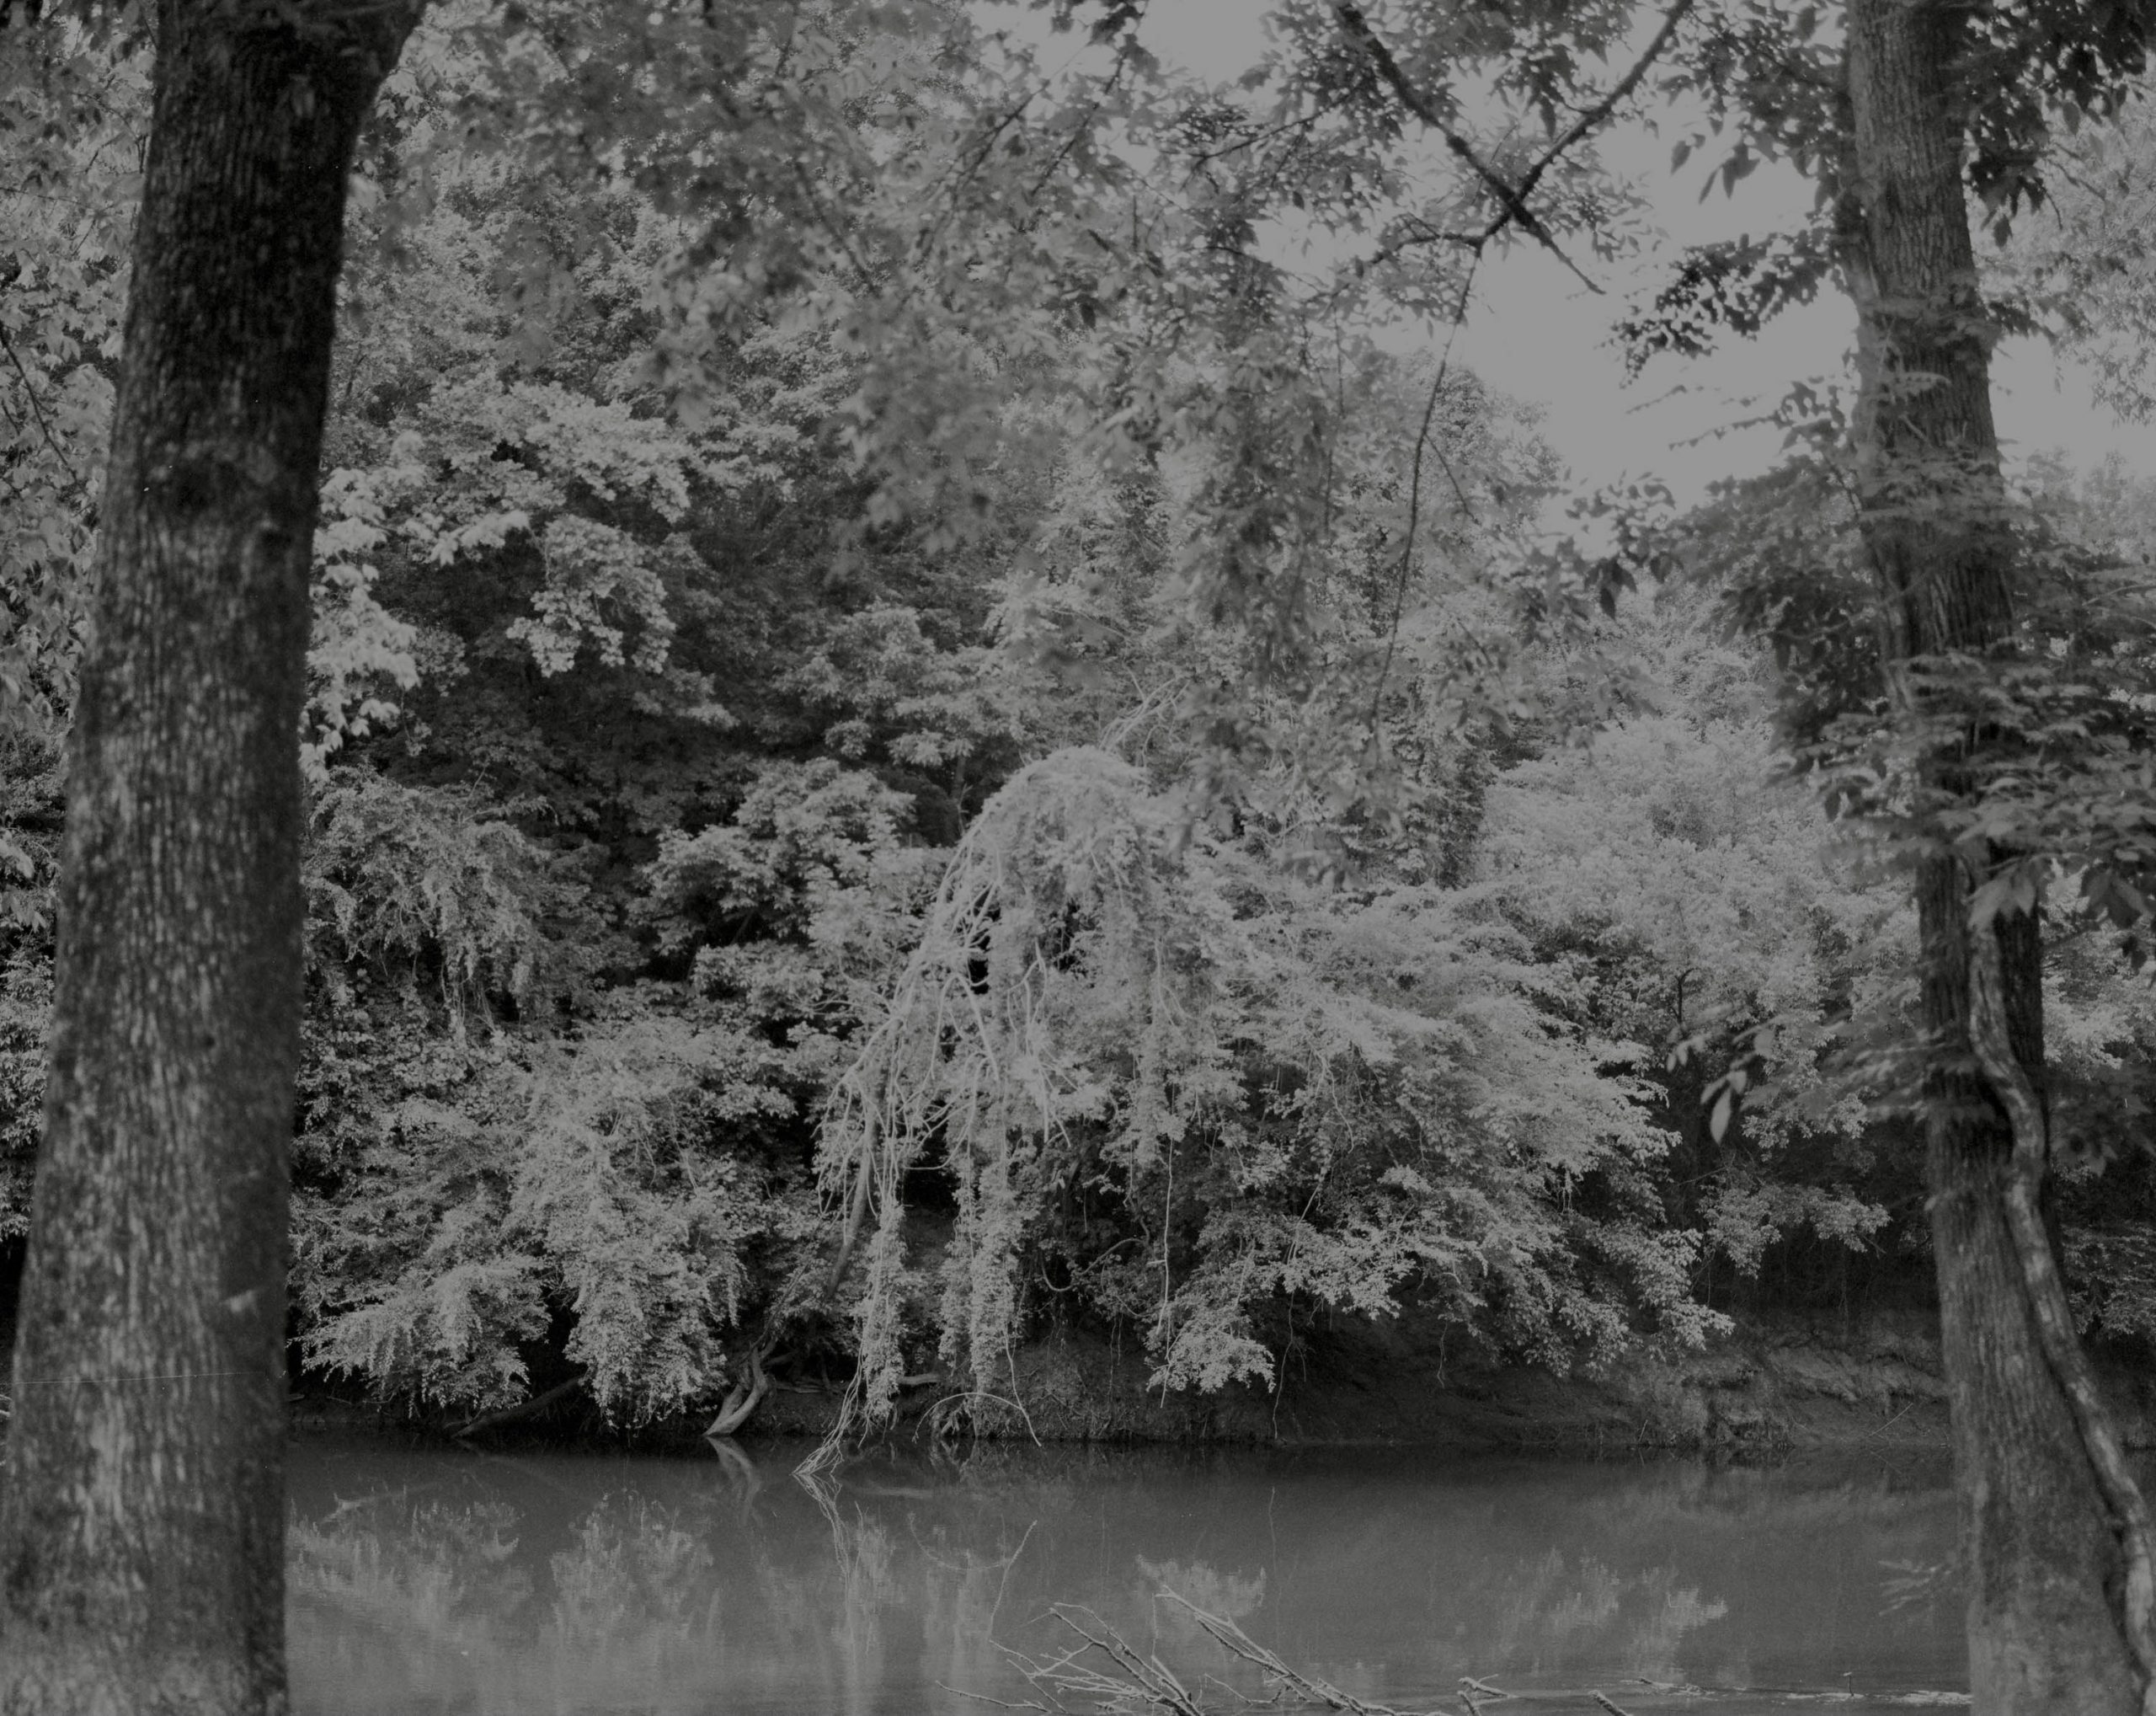 Swamp trees brush against a local river in Clayton, North Carolina.